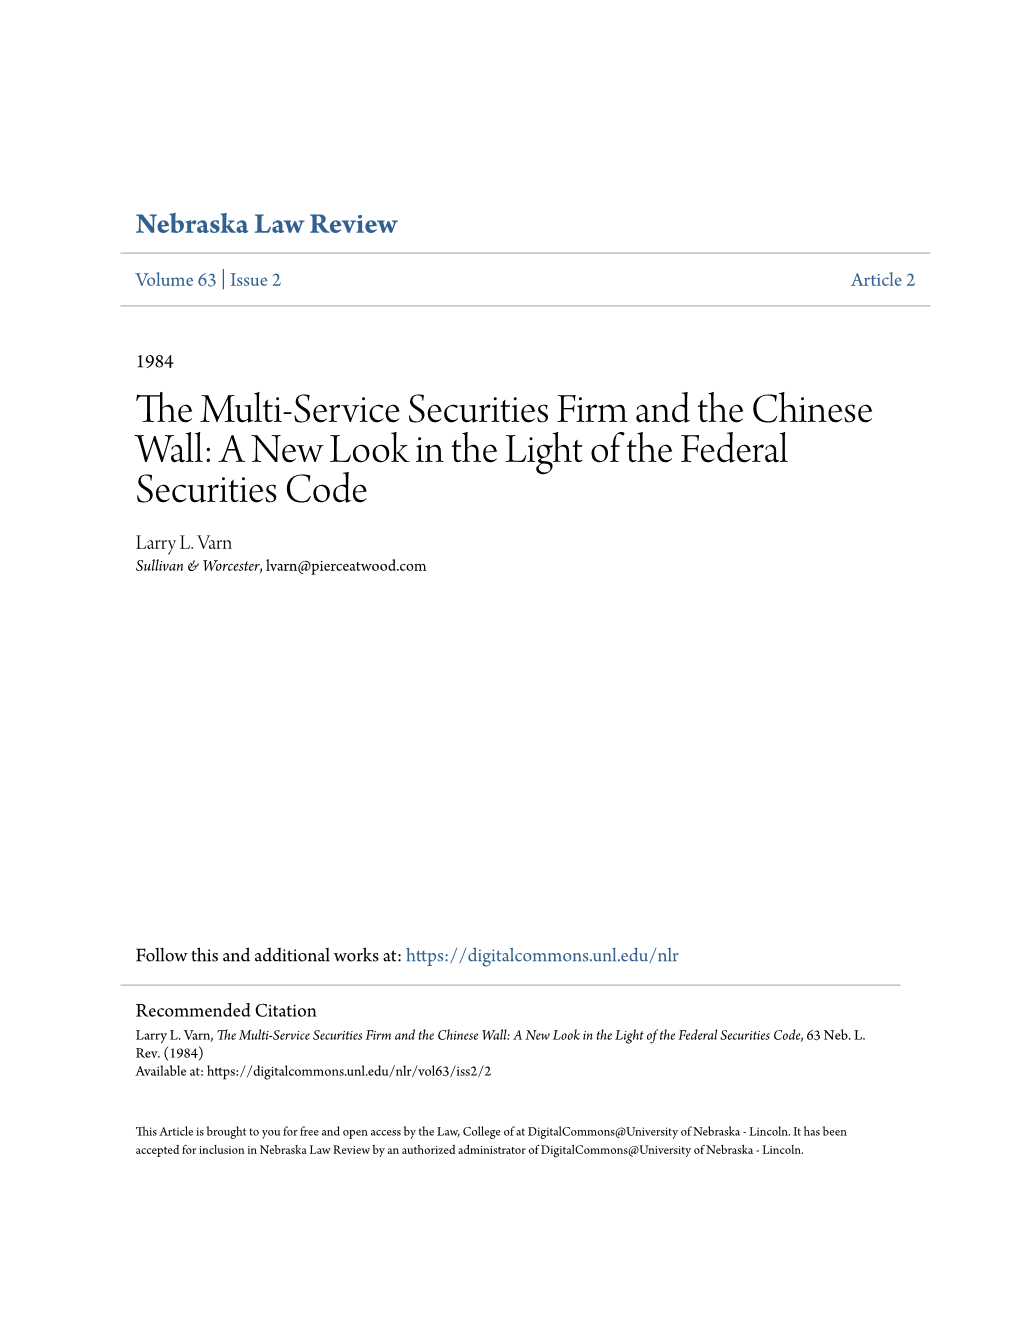 The Multi-Service Securities Firm and the Chinese Wall: a New Look in the Light of the Federal Securities Code, 63 Neb